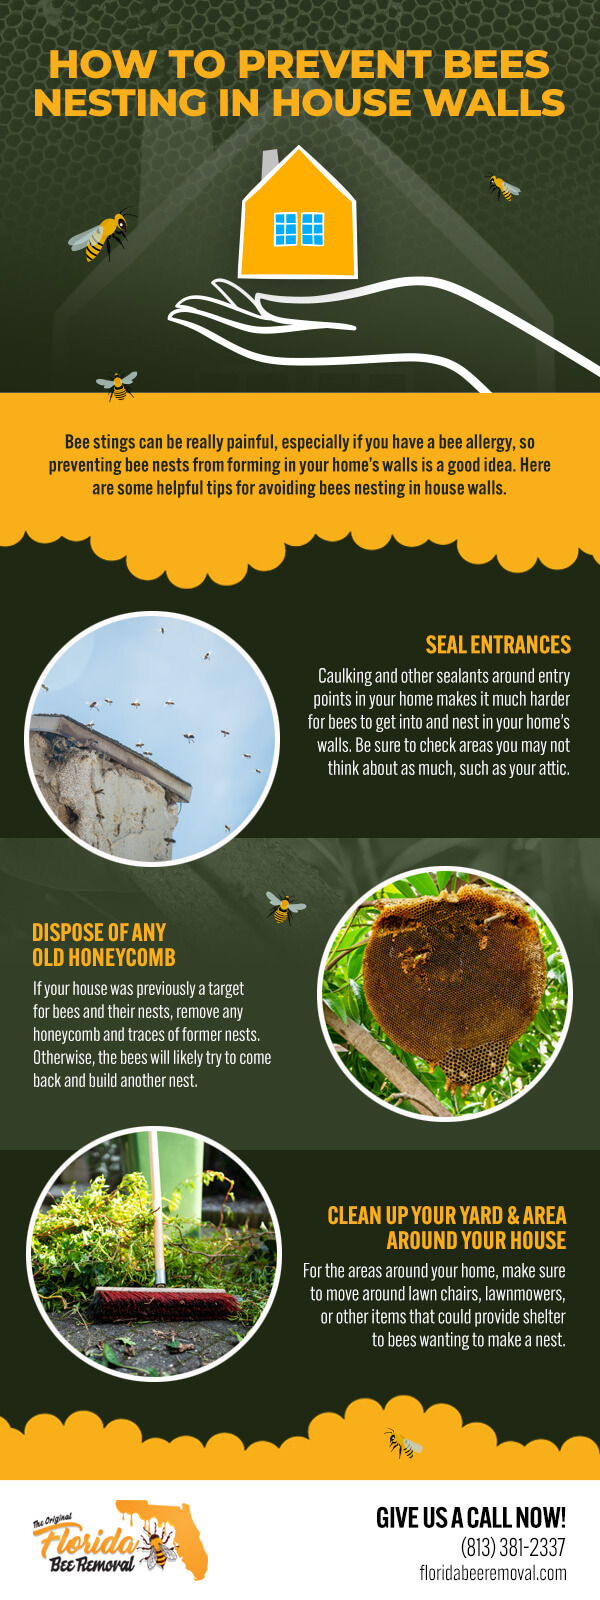 How to Prevent Bees Nesting in House Walls